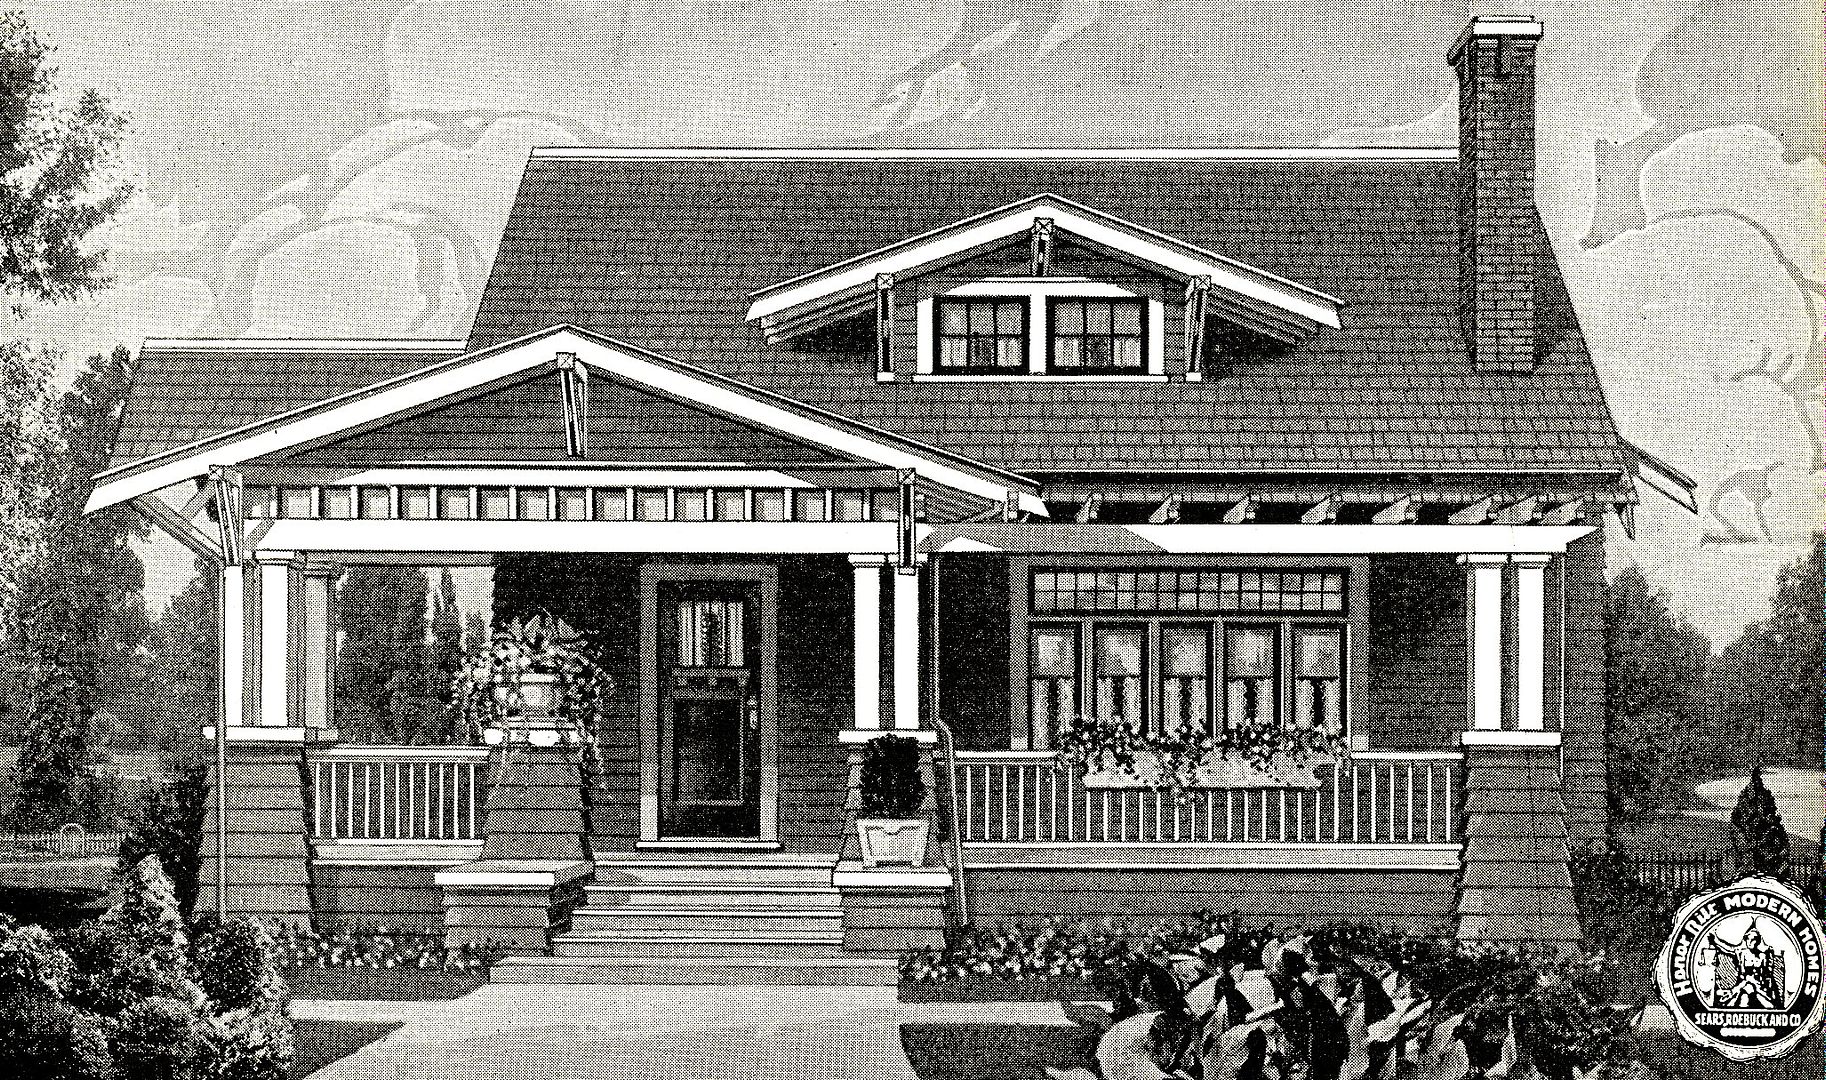 The Sears Corona has always been one of my favorite houses (1921).